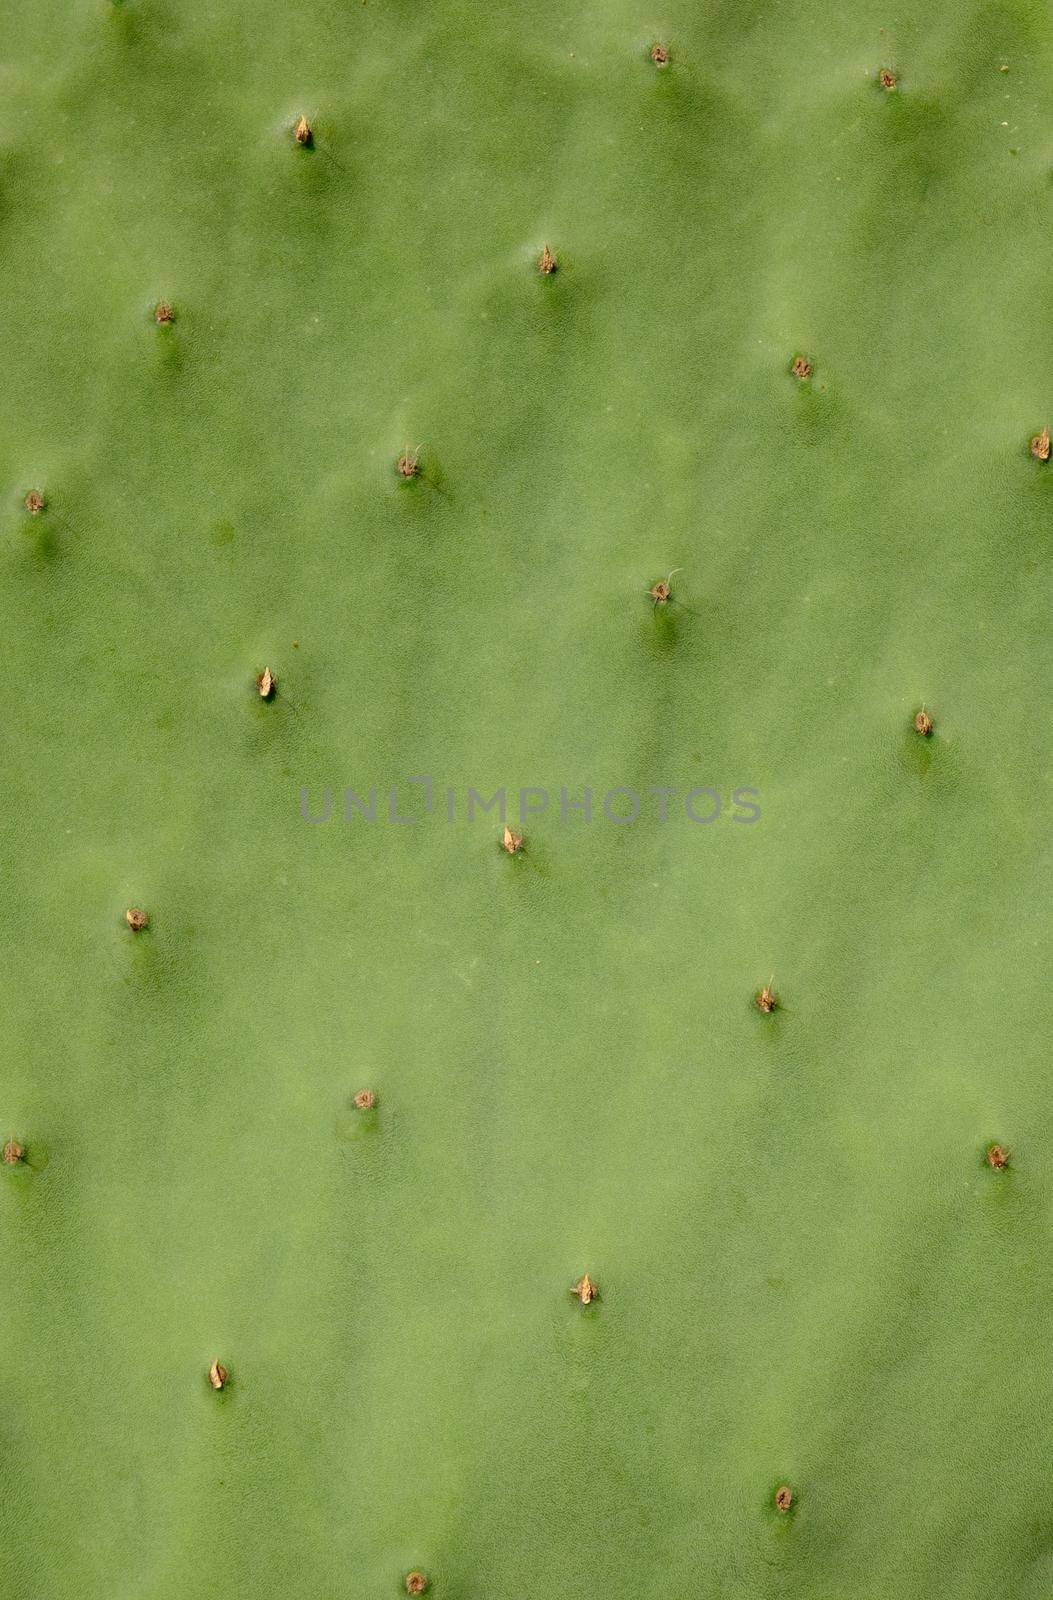 Abstract Background Texture Of A Spiky Cactus